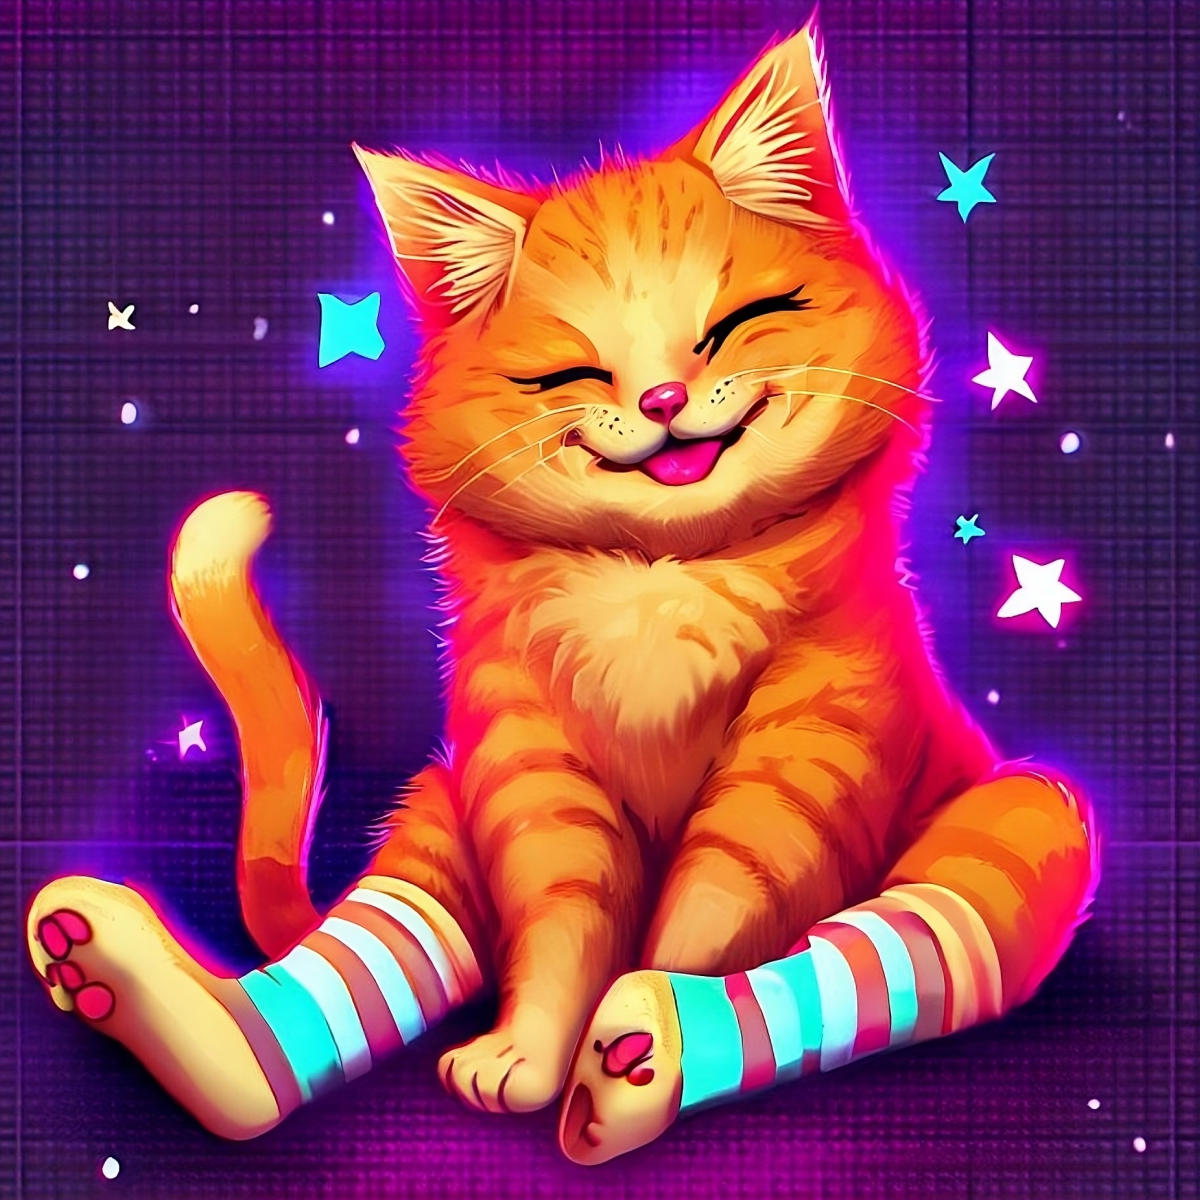 A kitten rendered in synthwave style with socks on its hindlegs. Smiling while sitting. The background is dark with stars.